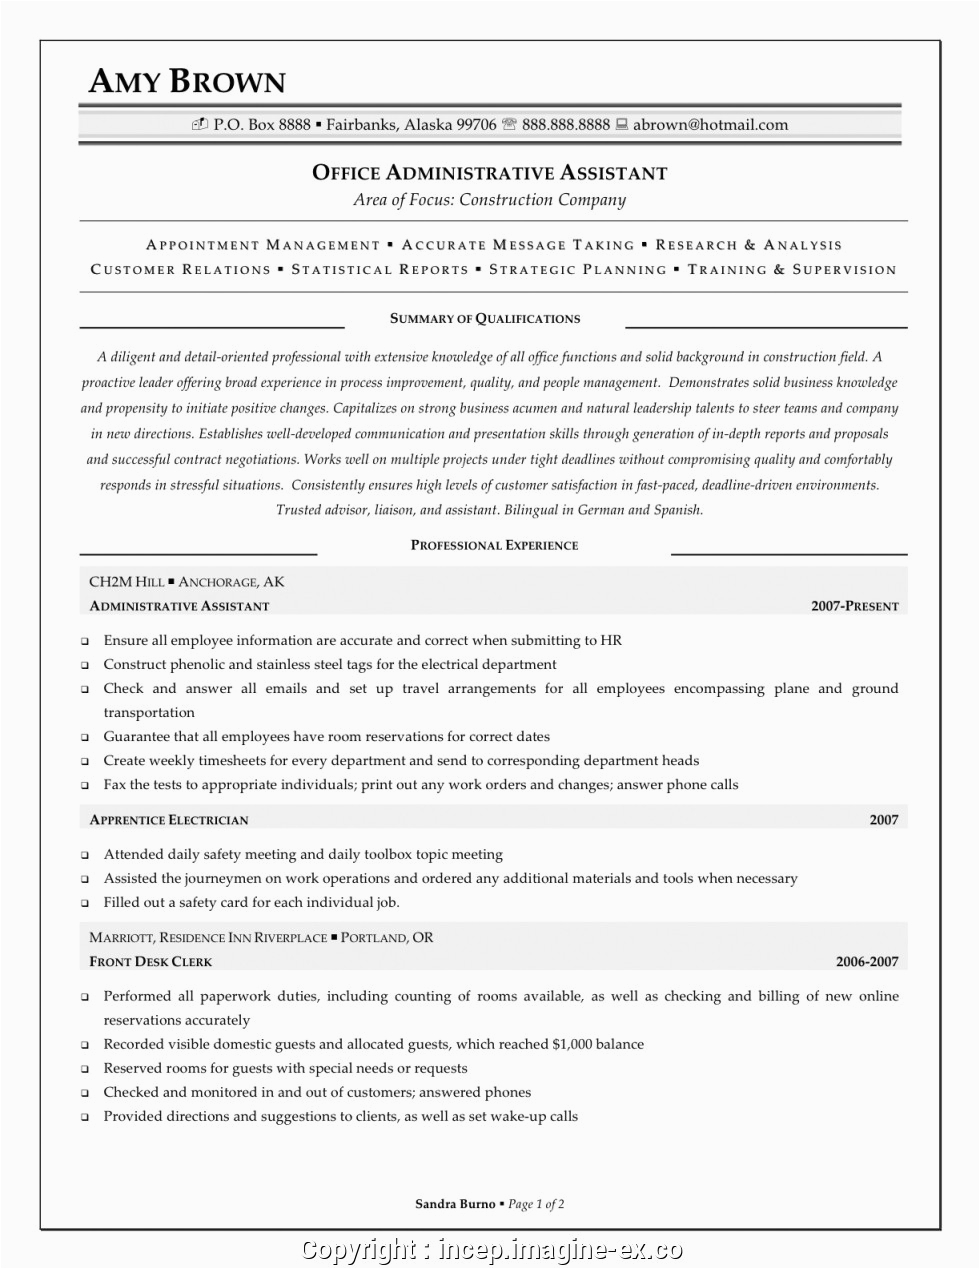 creative office administrative assistant resume